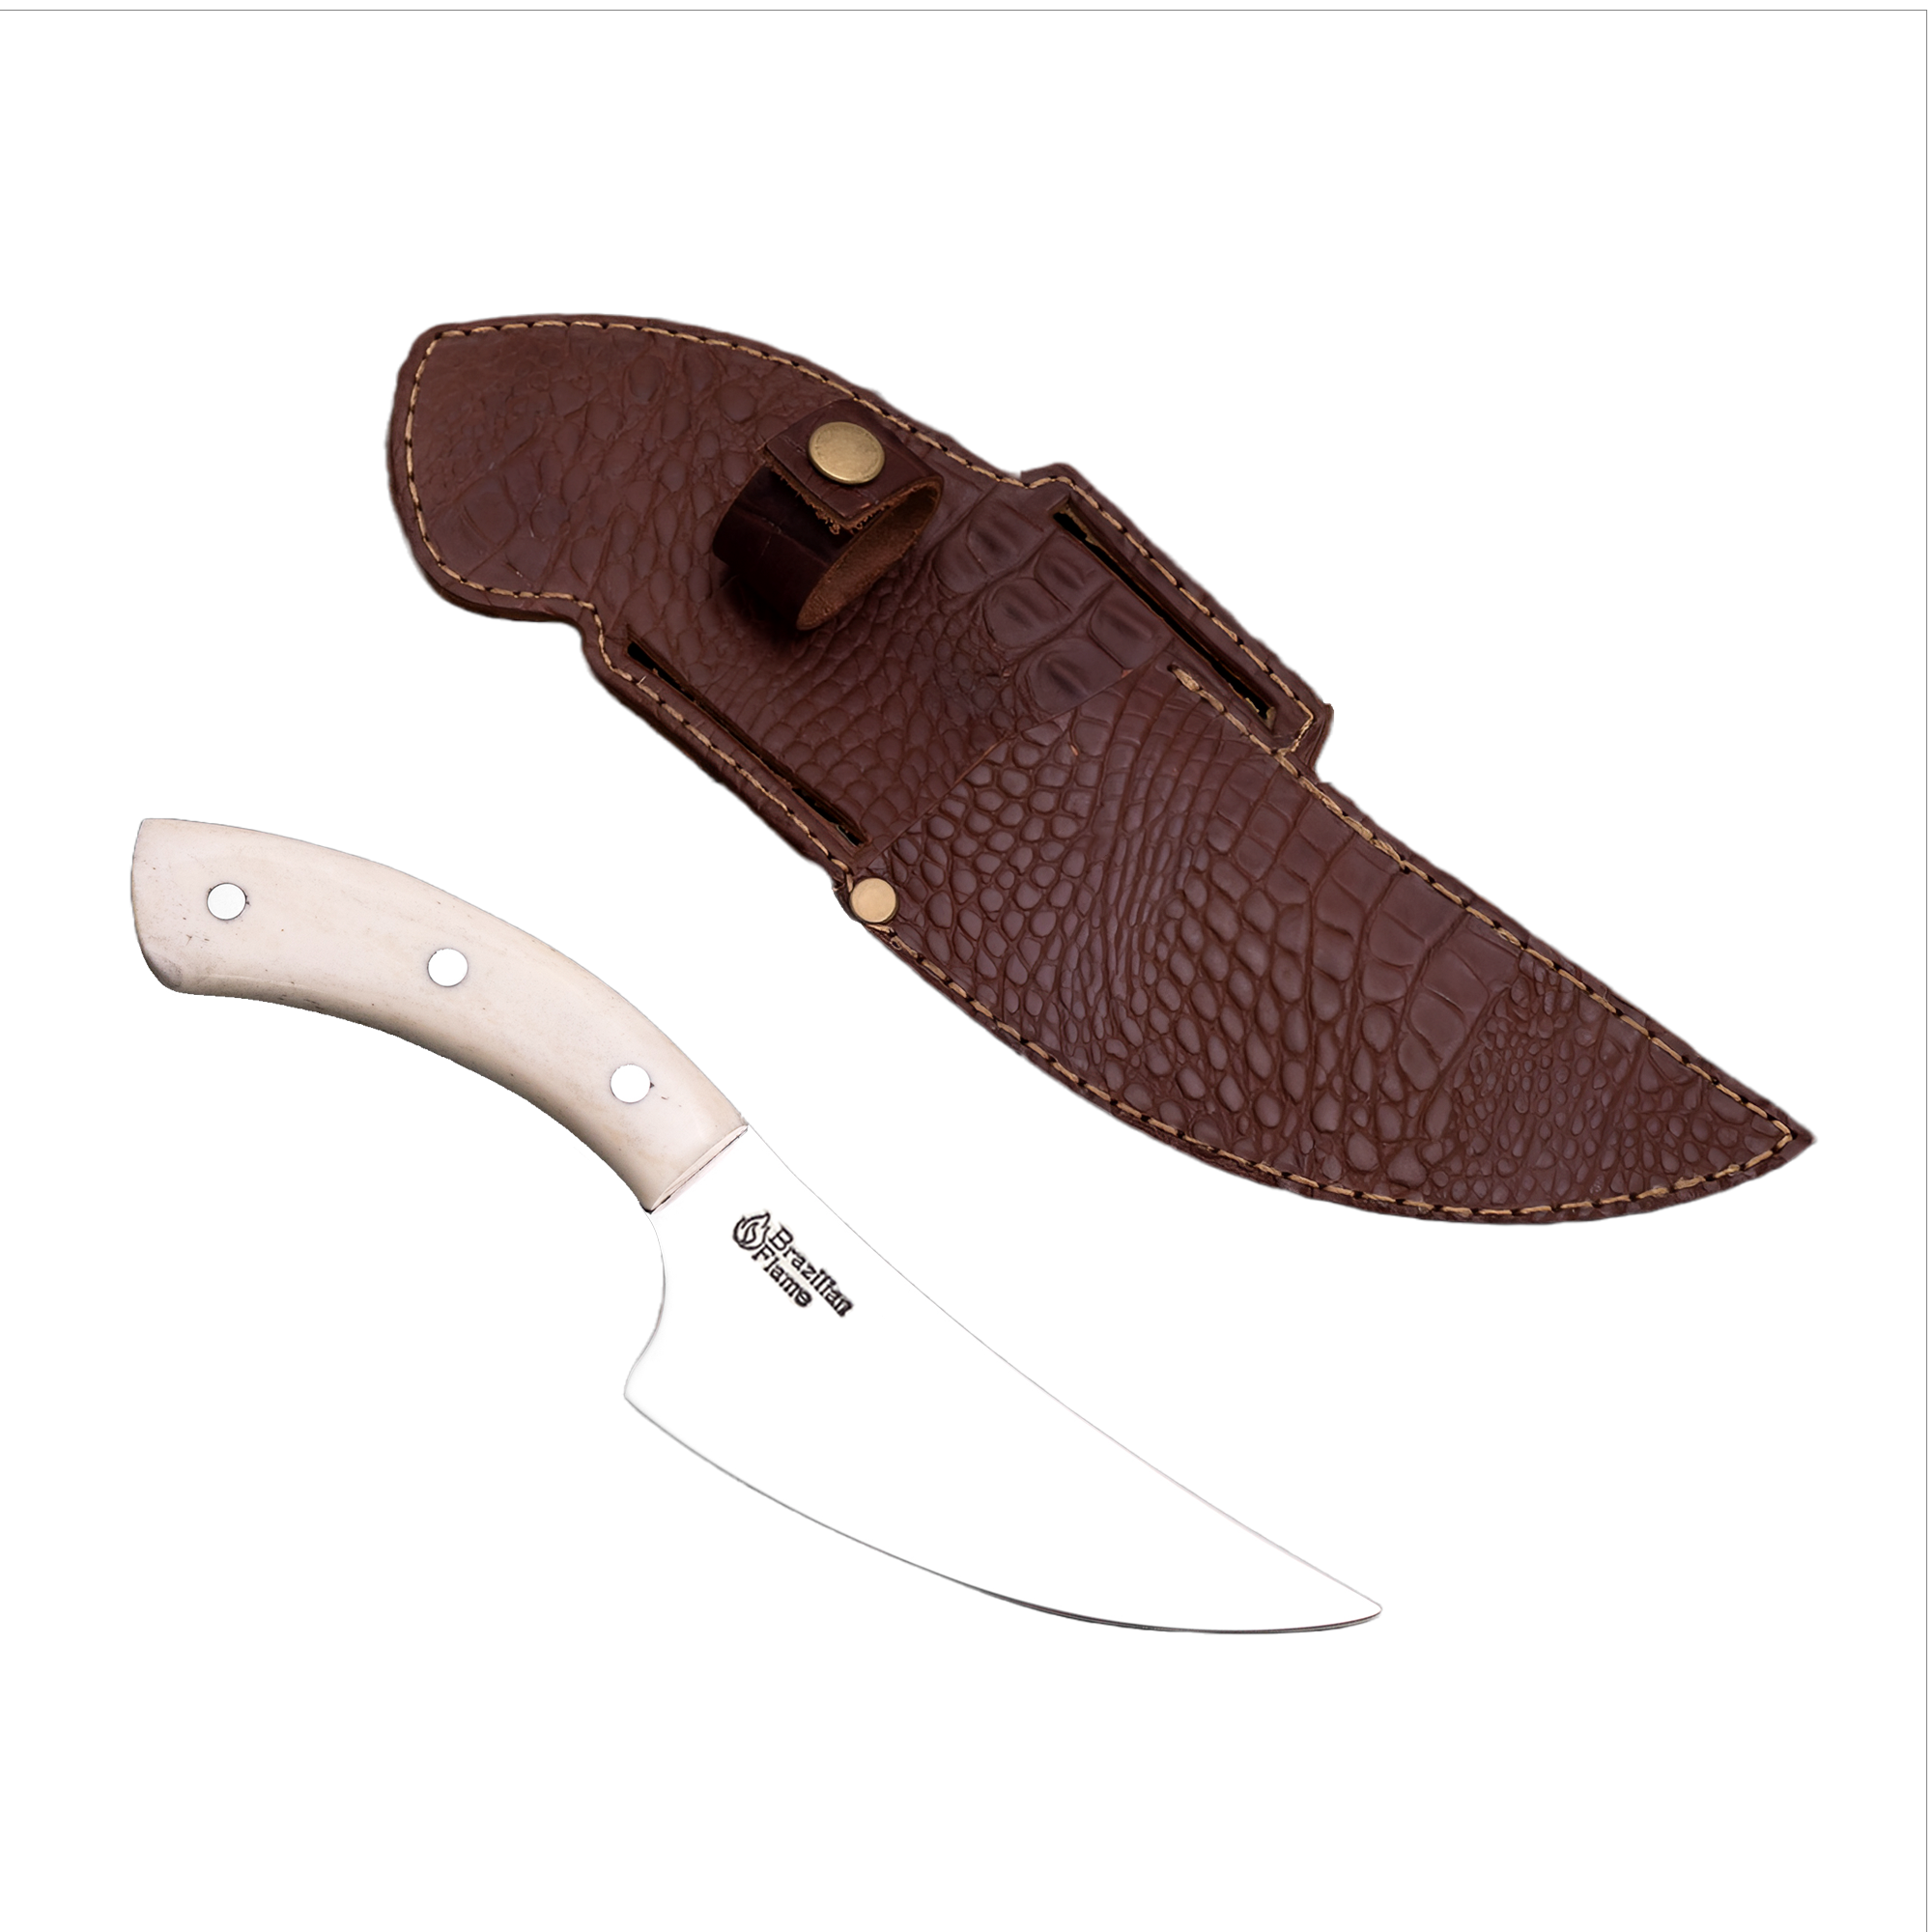 Altomino Stainless Steel Chef Knife From Our Best Knives